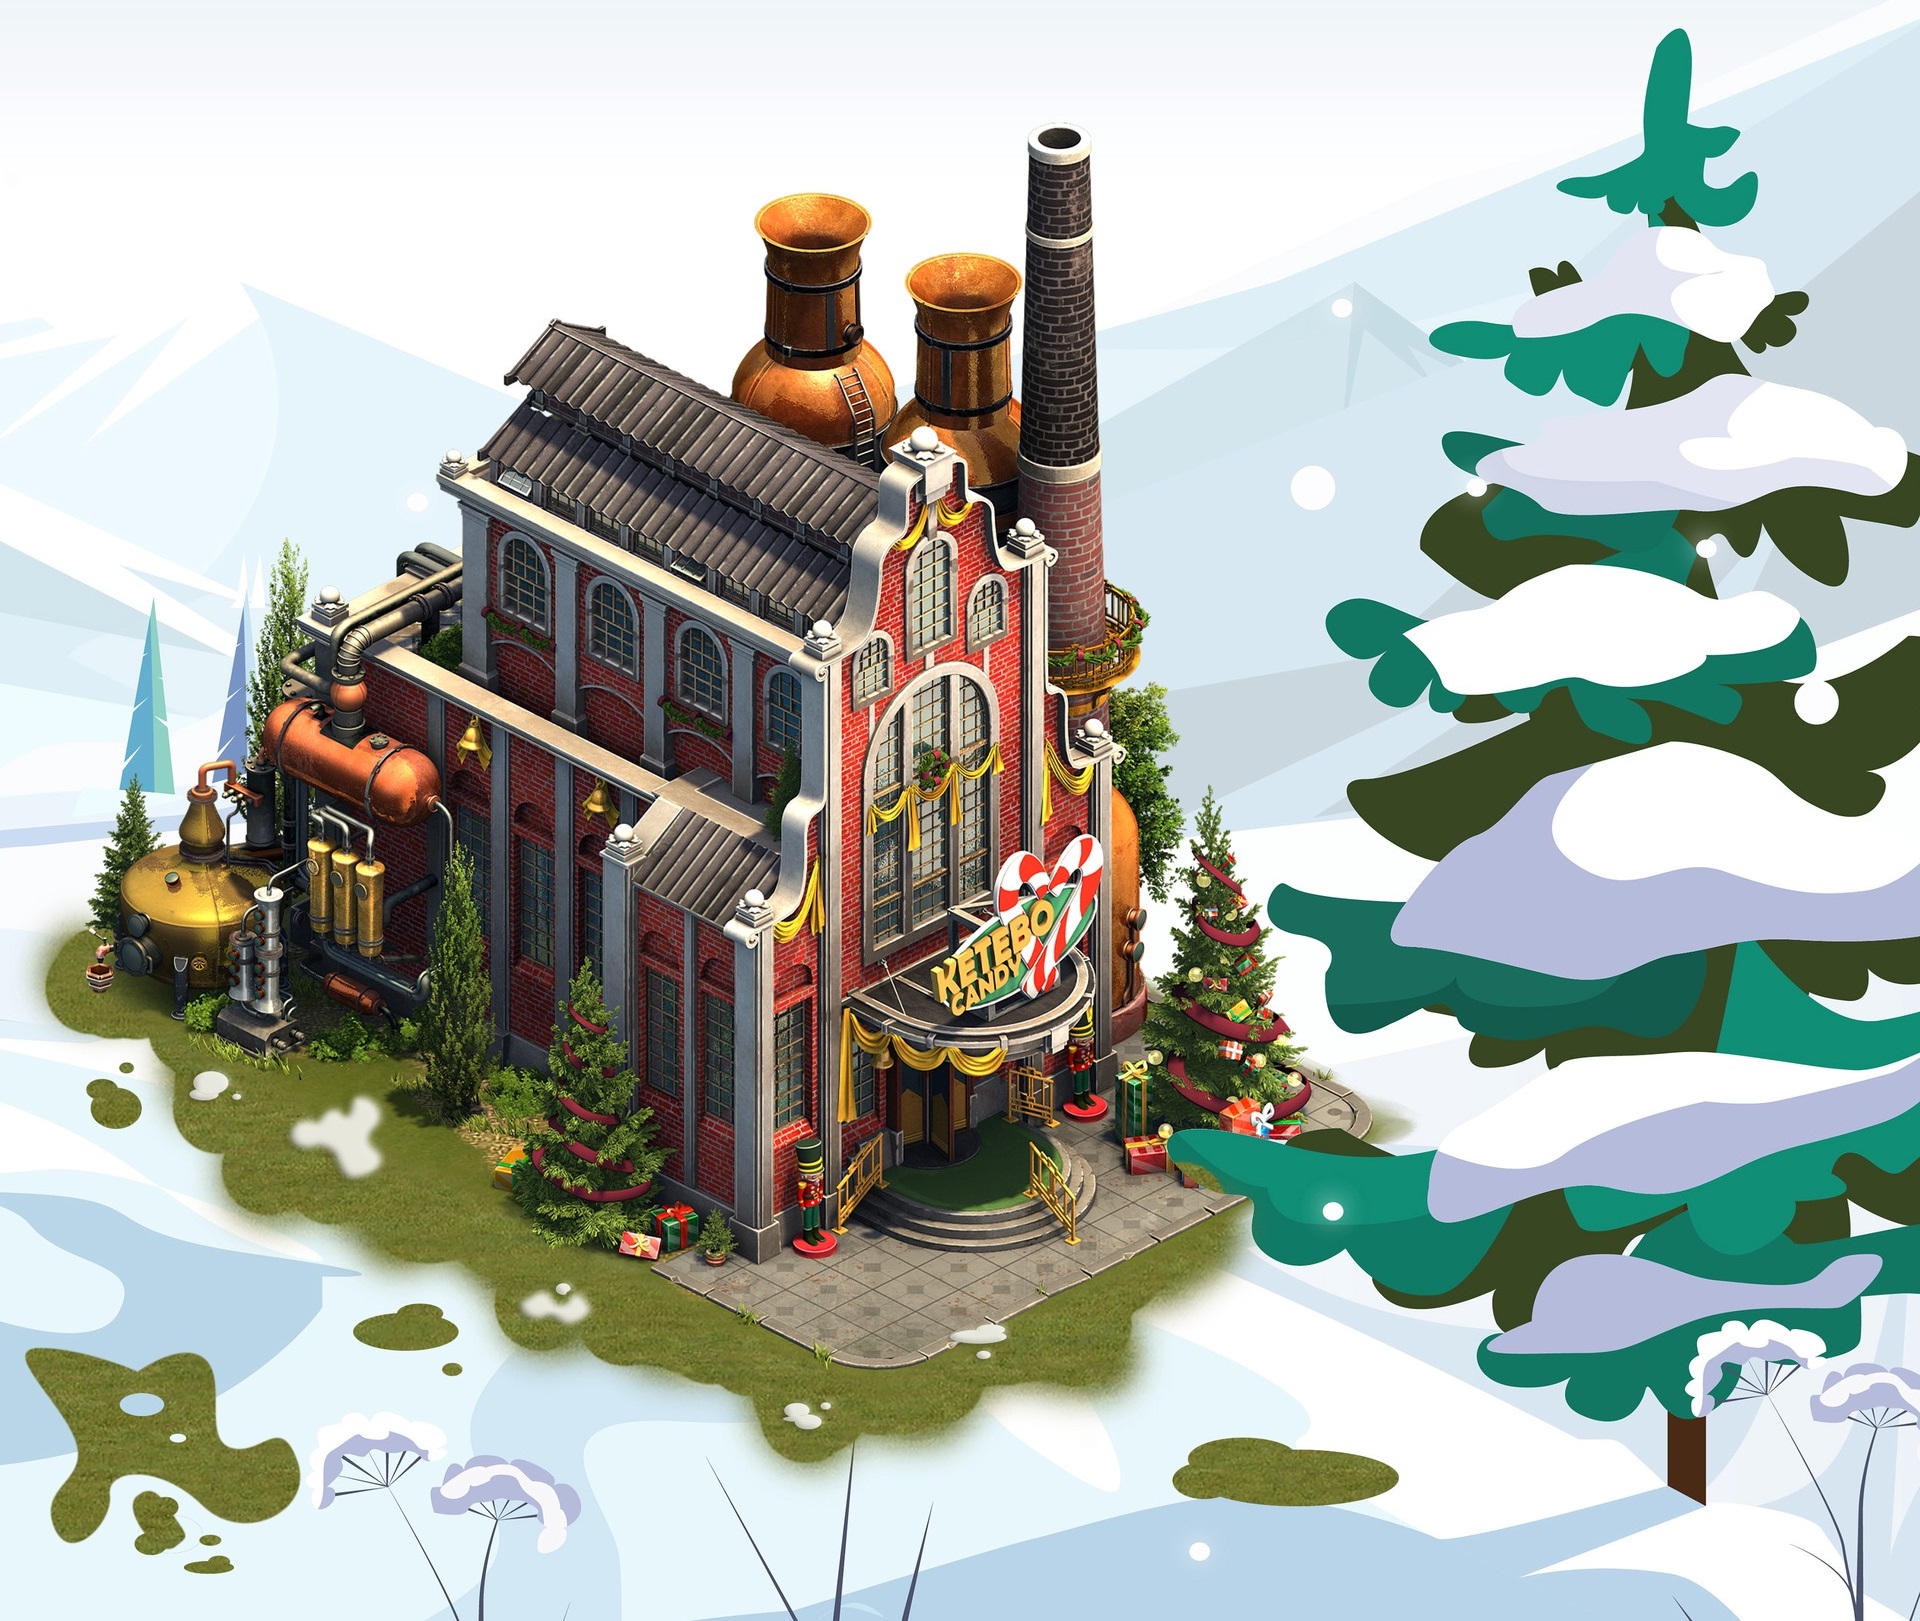 Video Games Forge Of Empires Factories Candy Chimneys Trees Snow Mountains Winter Christmas Tree Bui 1920x1621